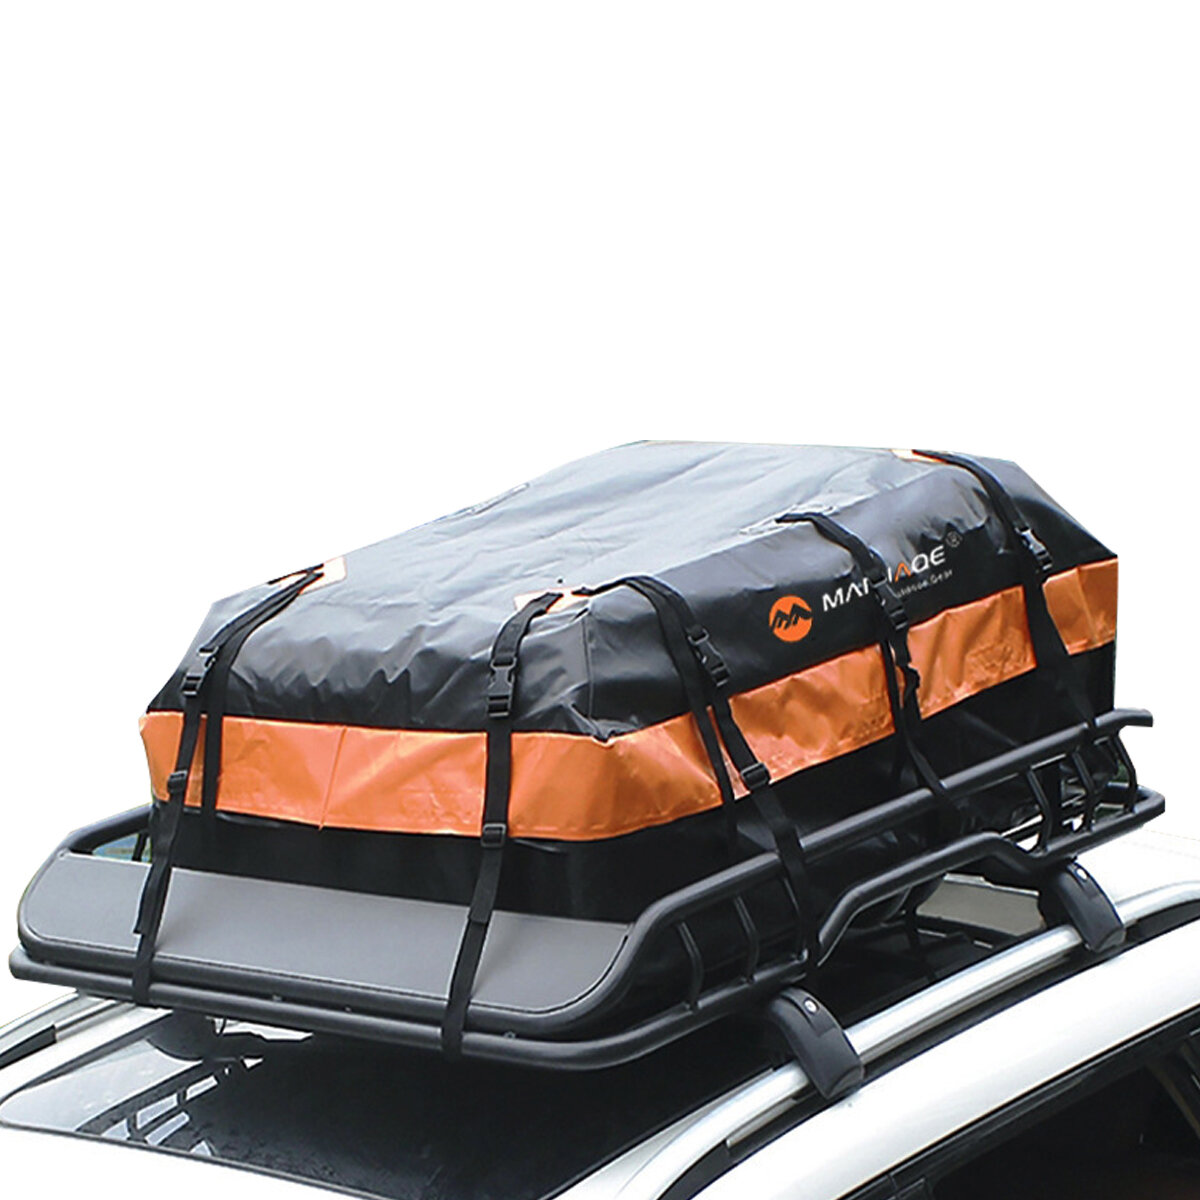 MARJAQE 450L Car Rooftop Cargo Bag Waterproof Car Top Carrier Bag 10 Reinforced Straps Suitable for All Vehicle